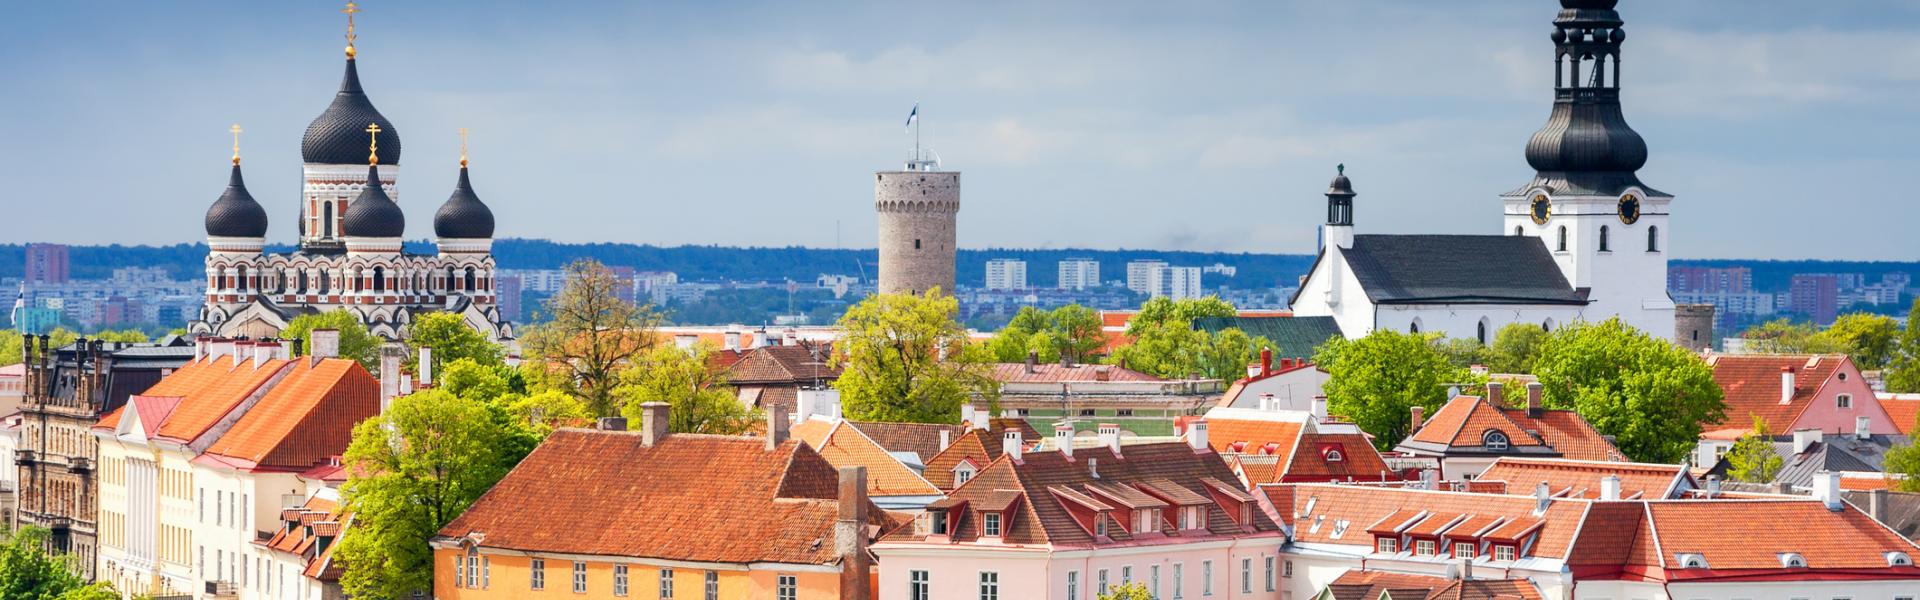 Holiday lettings & accommodation in Tallinn - HomeToGo